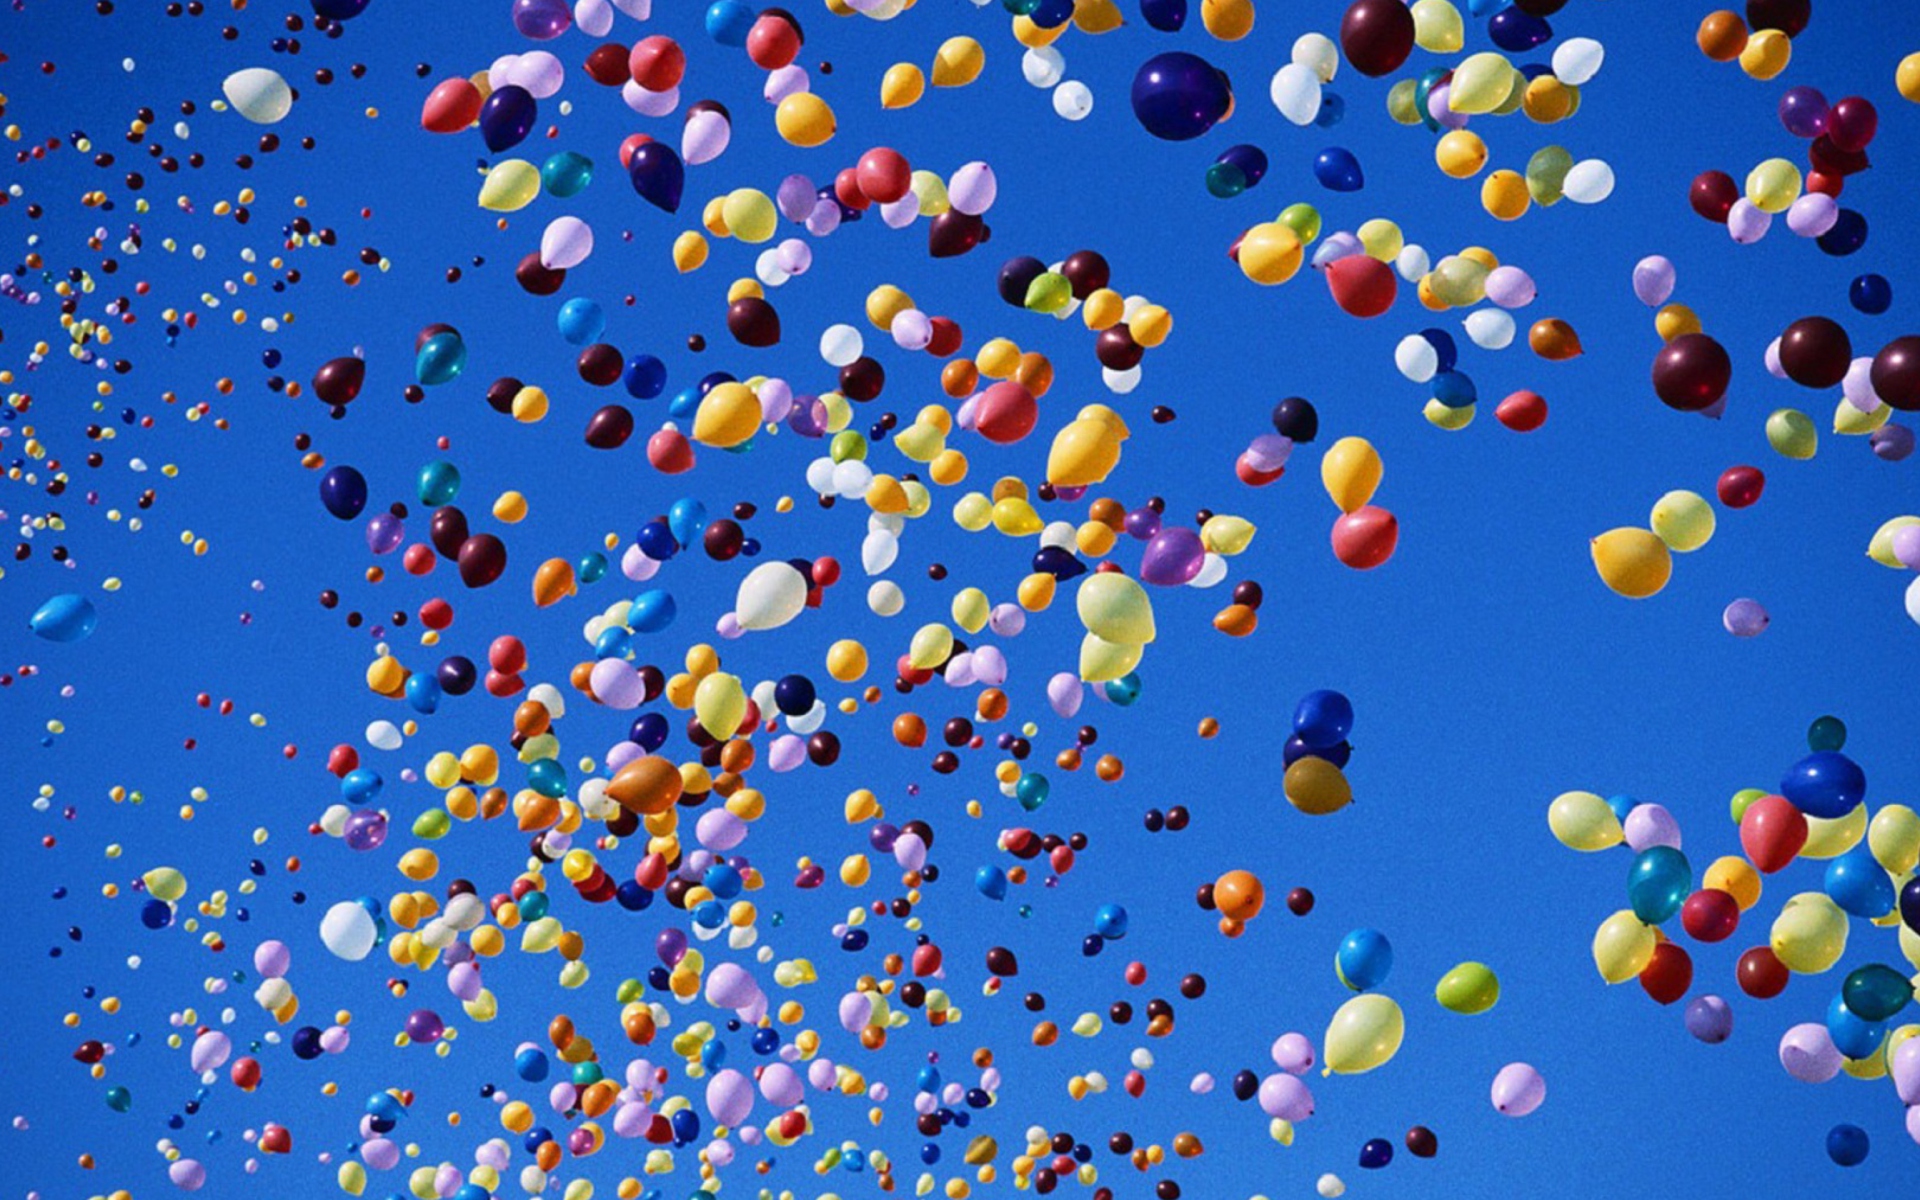 Colorful Balloons In Blue Sky wallpaper 1920x1200